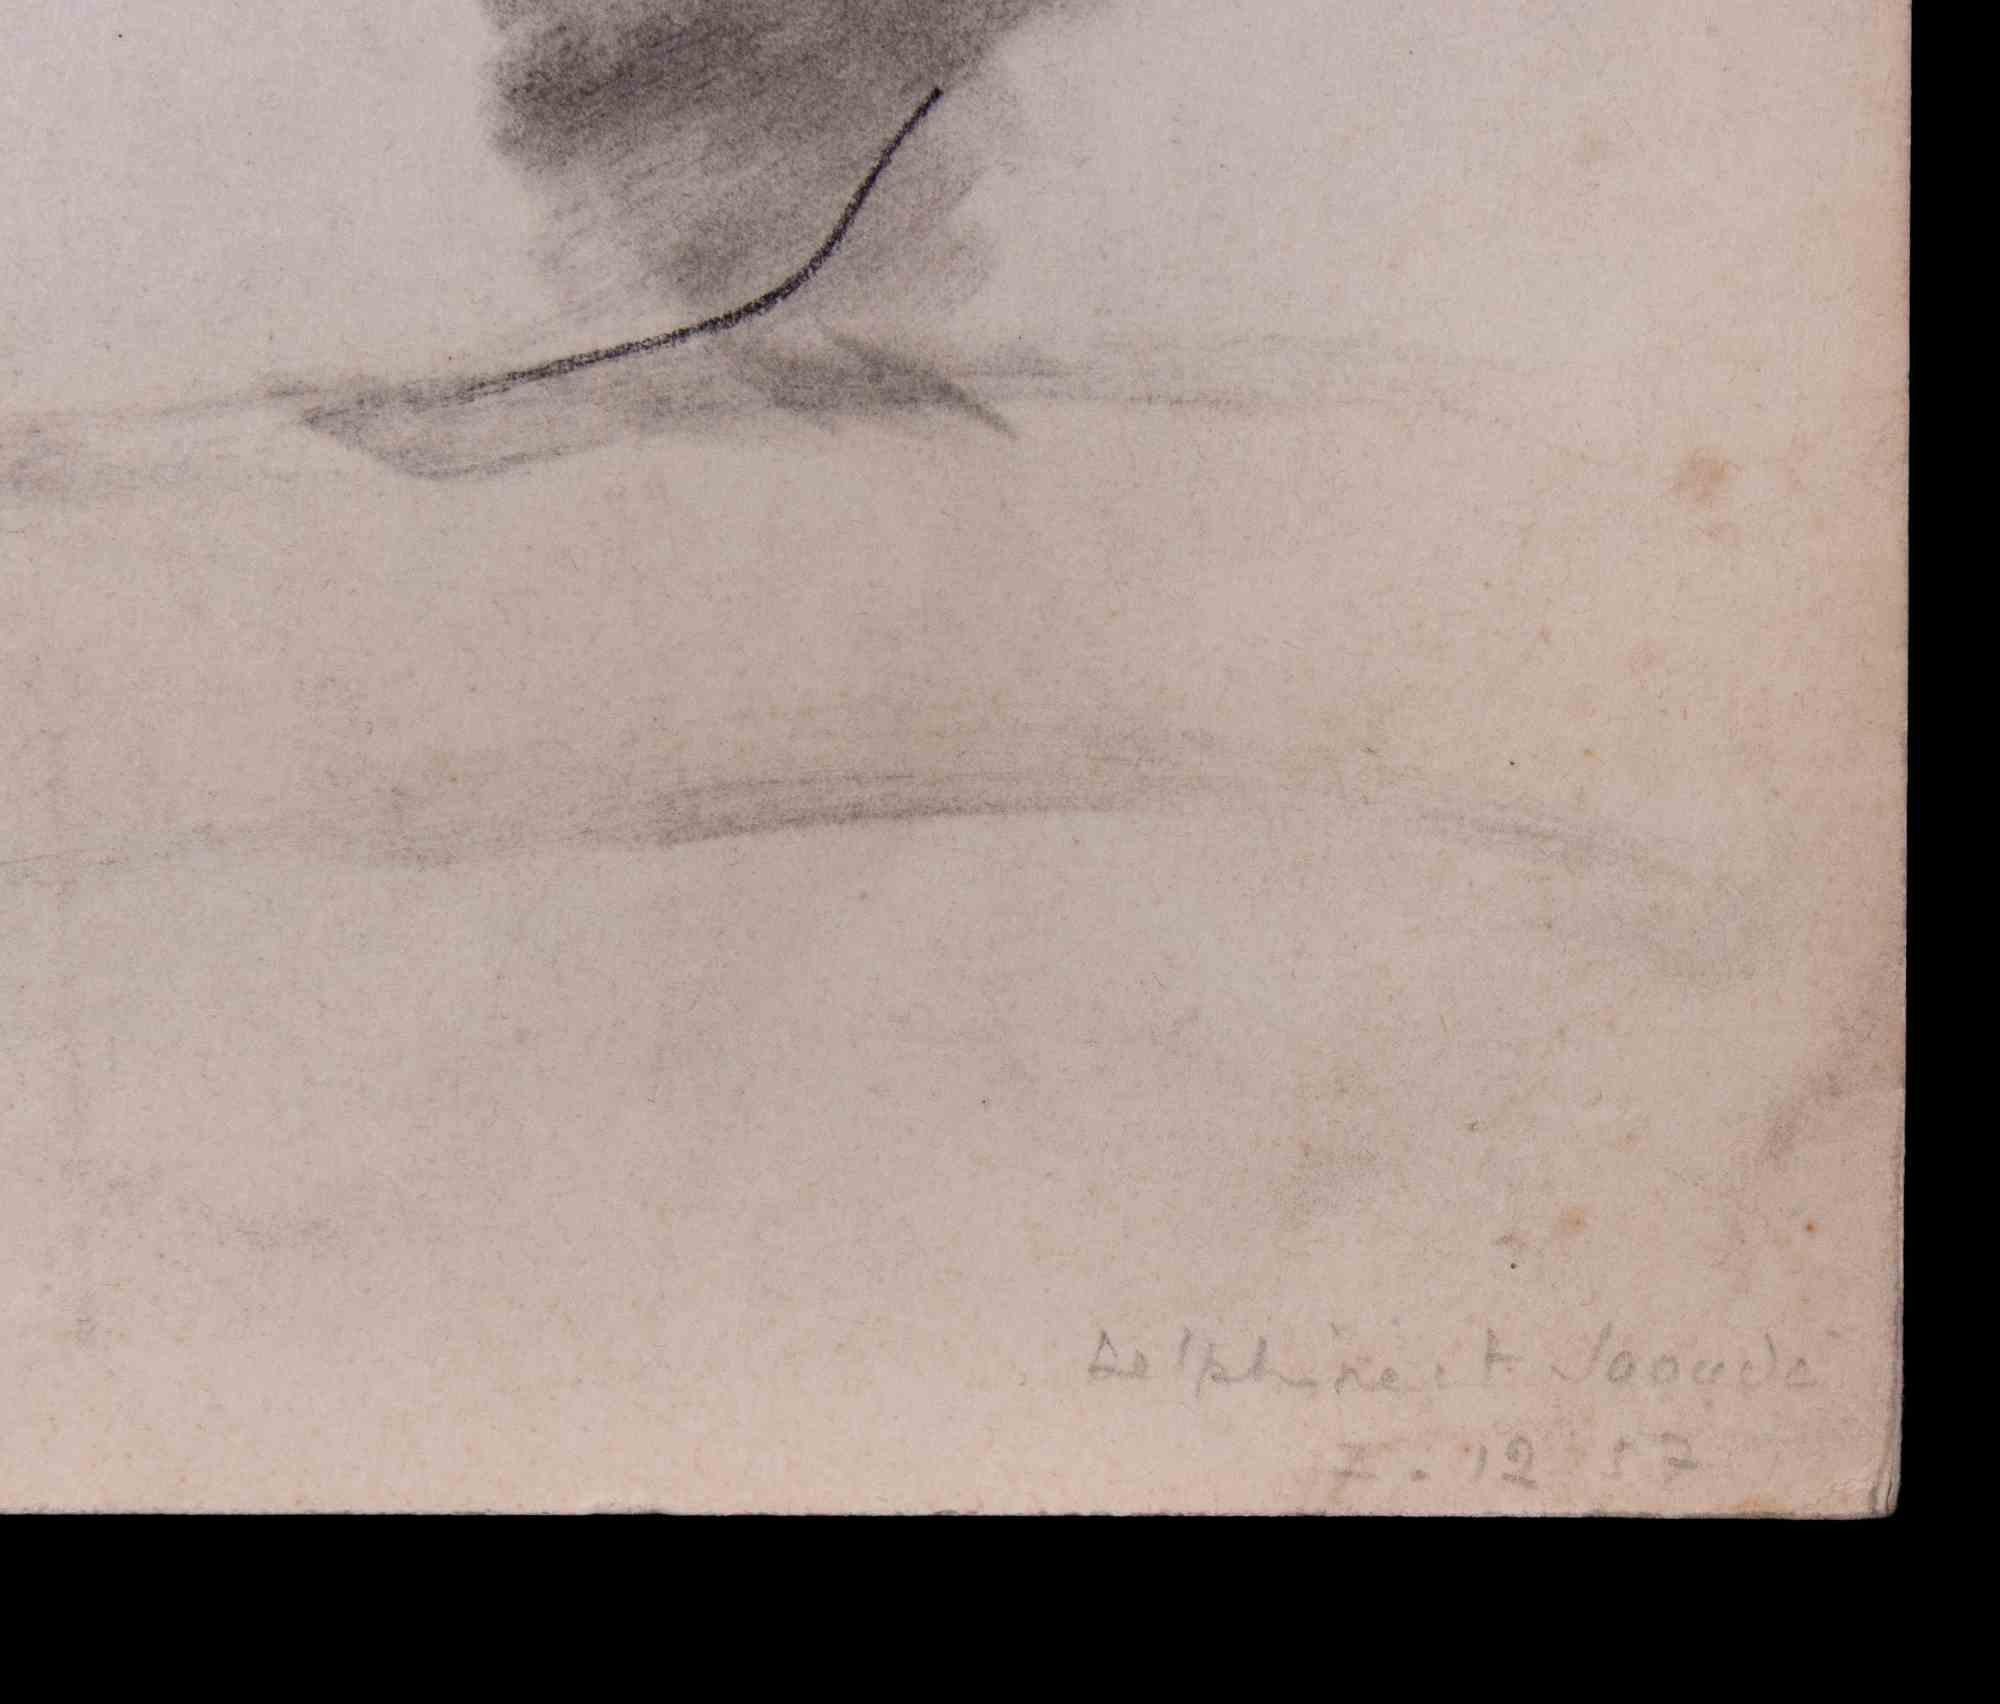 Sleeping Cats is an original carbon pencil drawing realized by Giselle Halff (1899-1971) in 1957. Not signed, is dated on the lower right margin